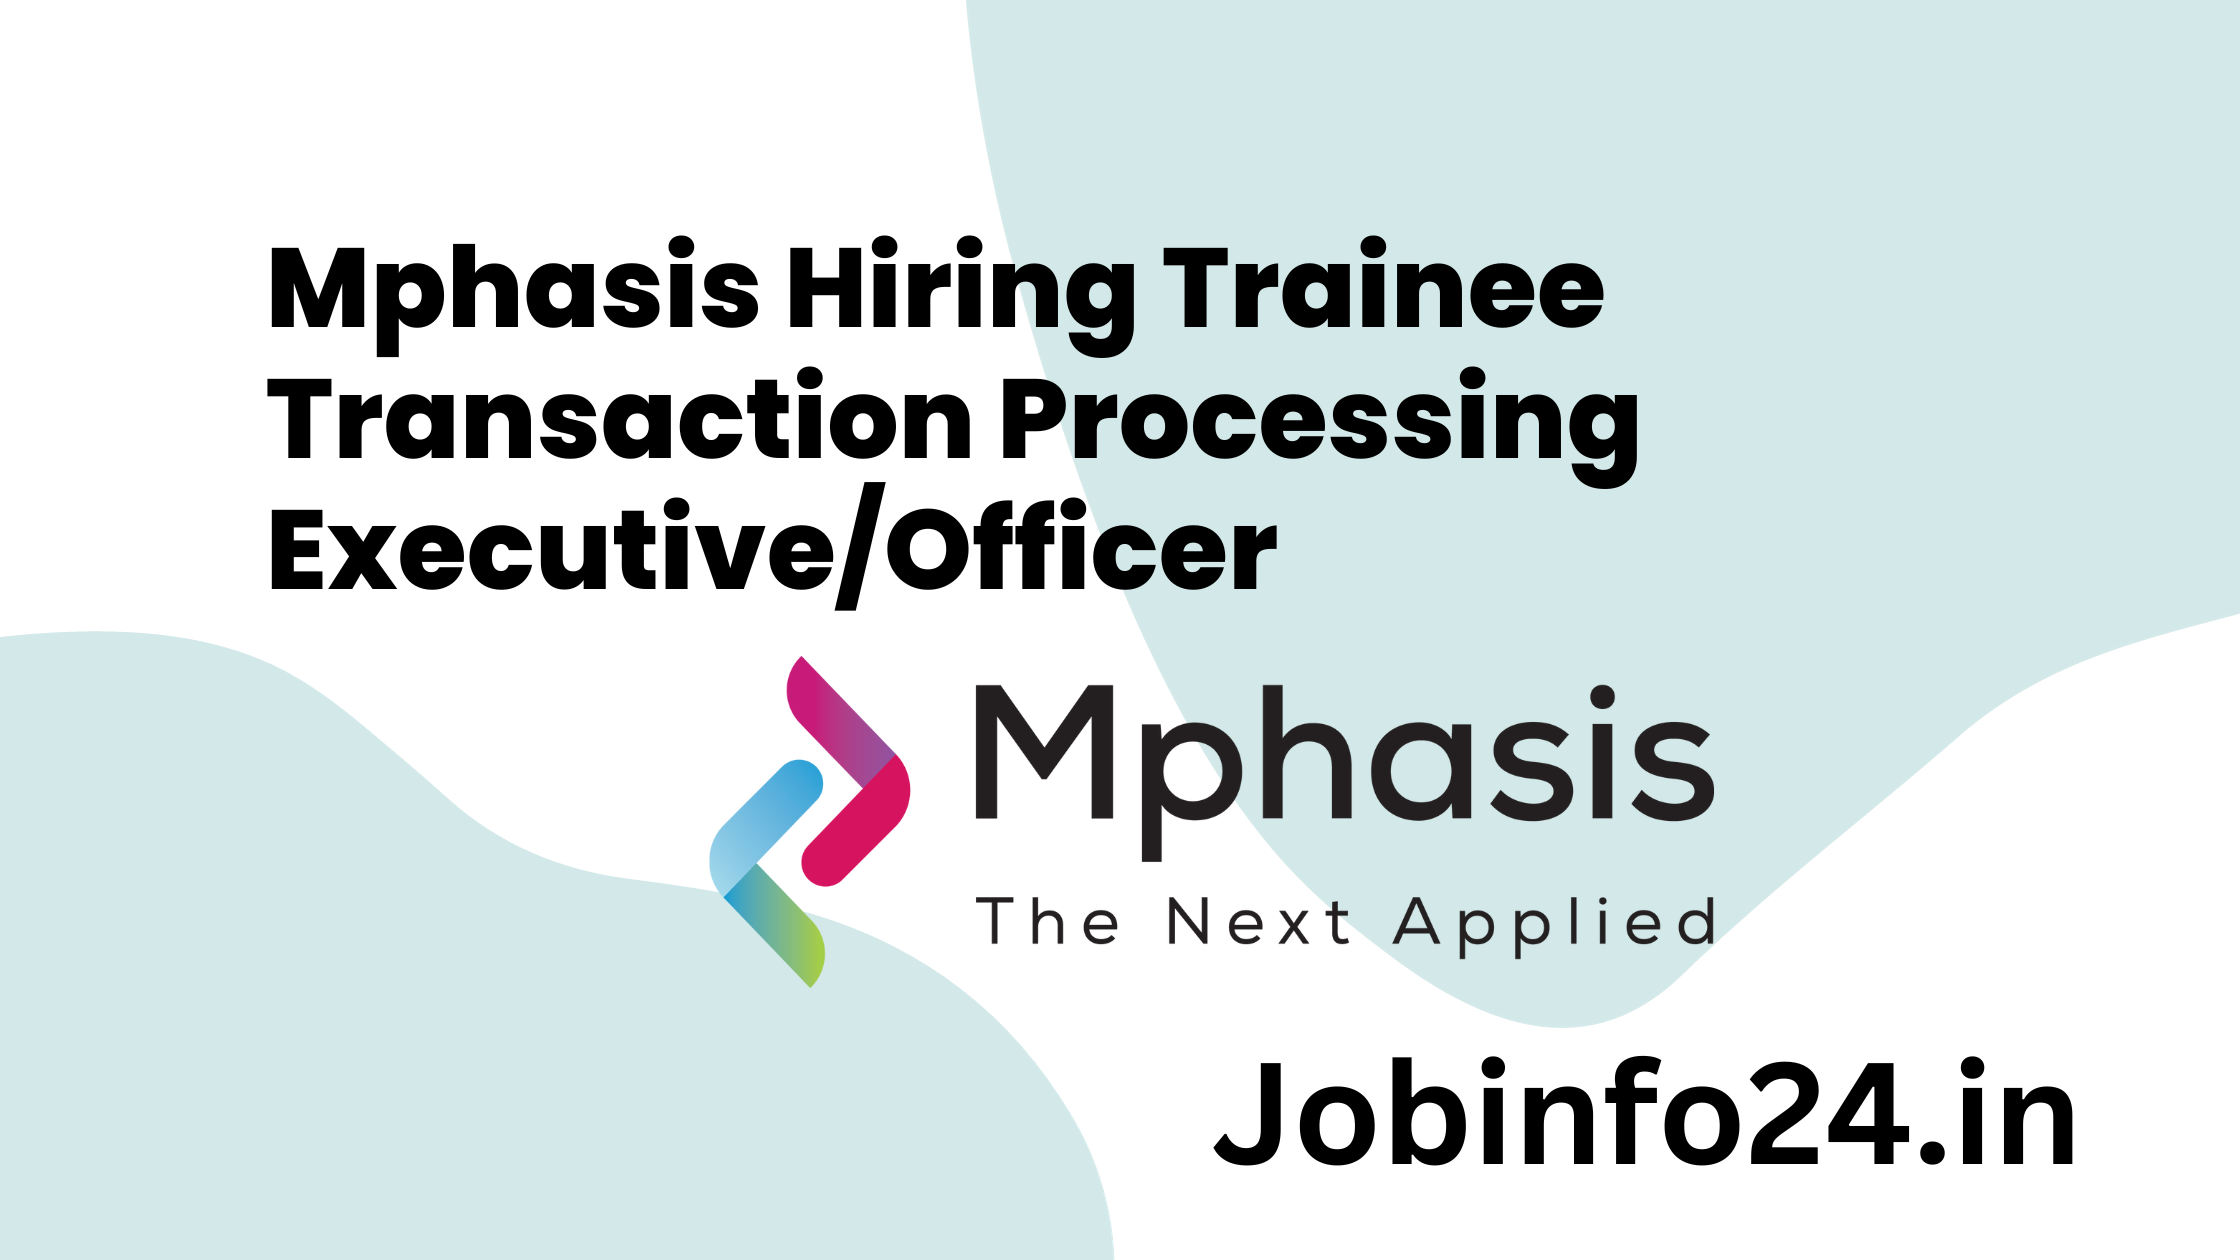 Mphasis Hiring Trainee Transaction Processing Executive/Officer